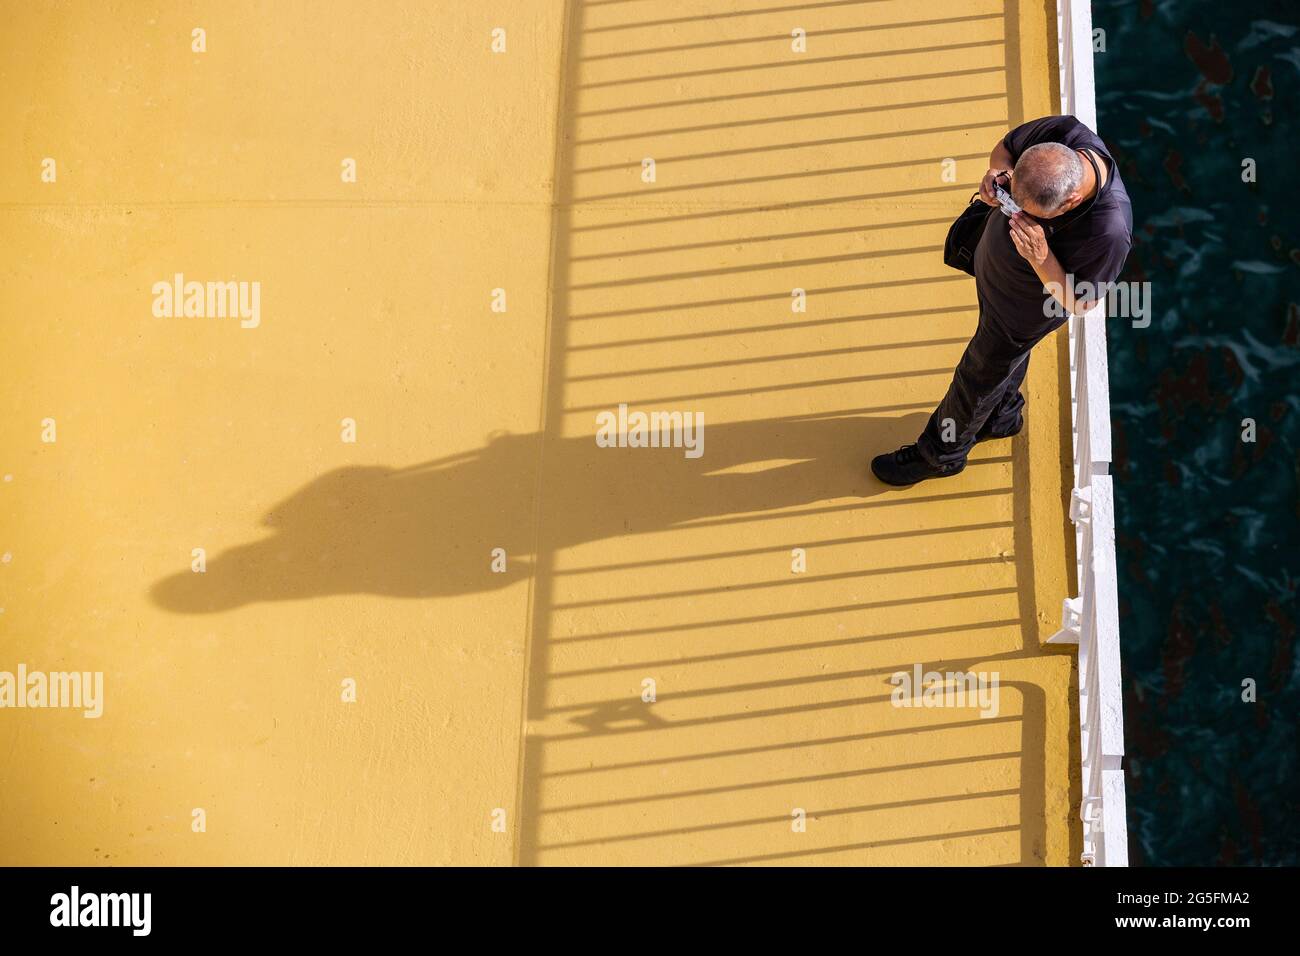 Photographer shooting his shadow leaning on the rail of a boat. Stock Photo